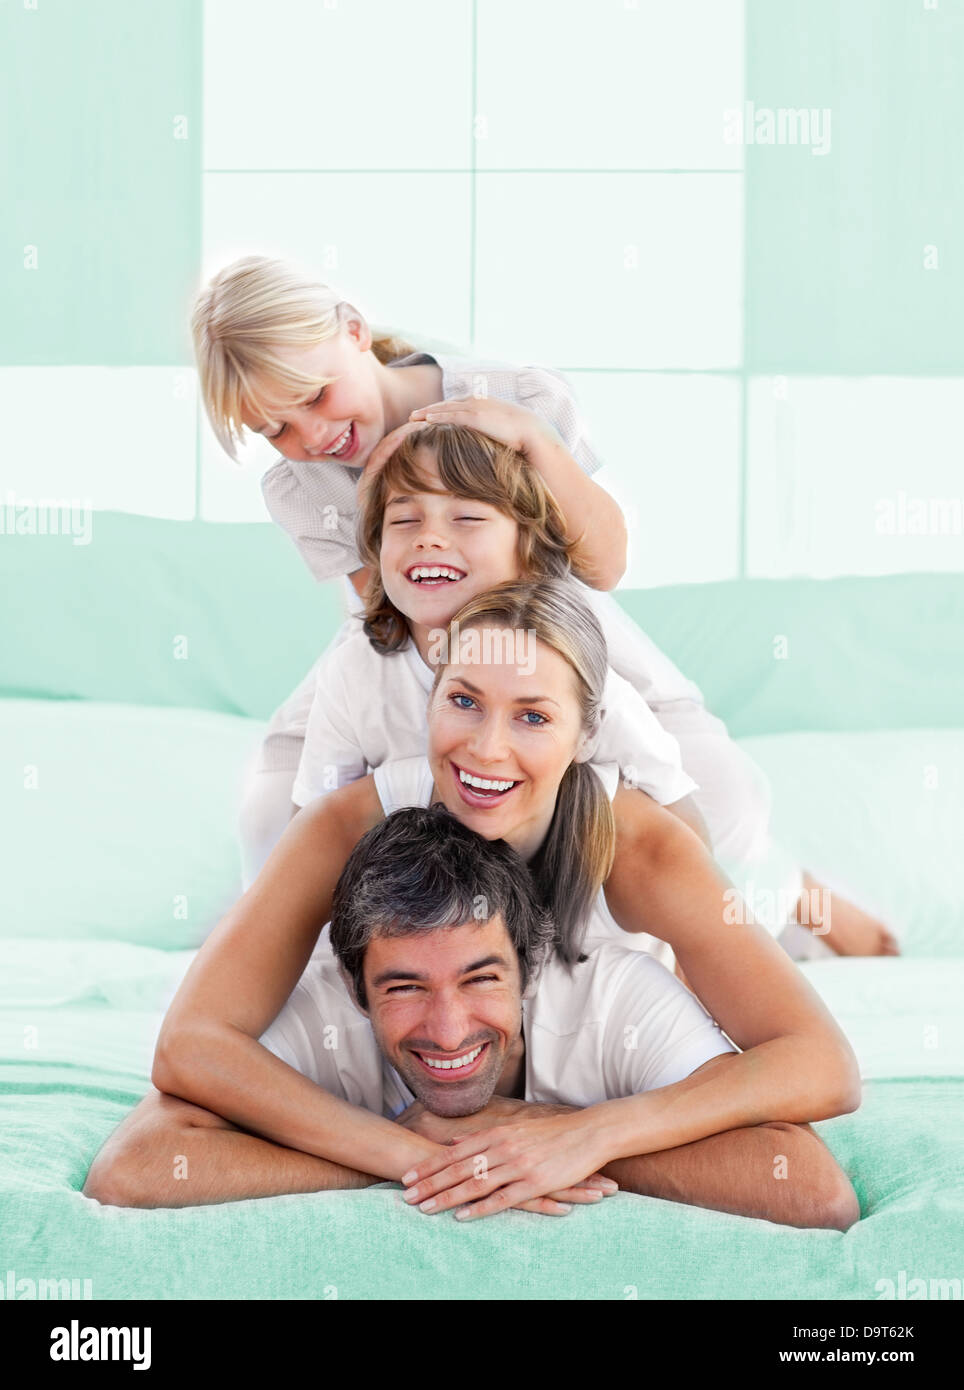 Smiling family piled on top of dad Stock Photo